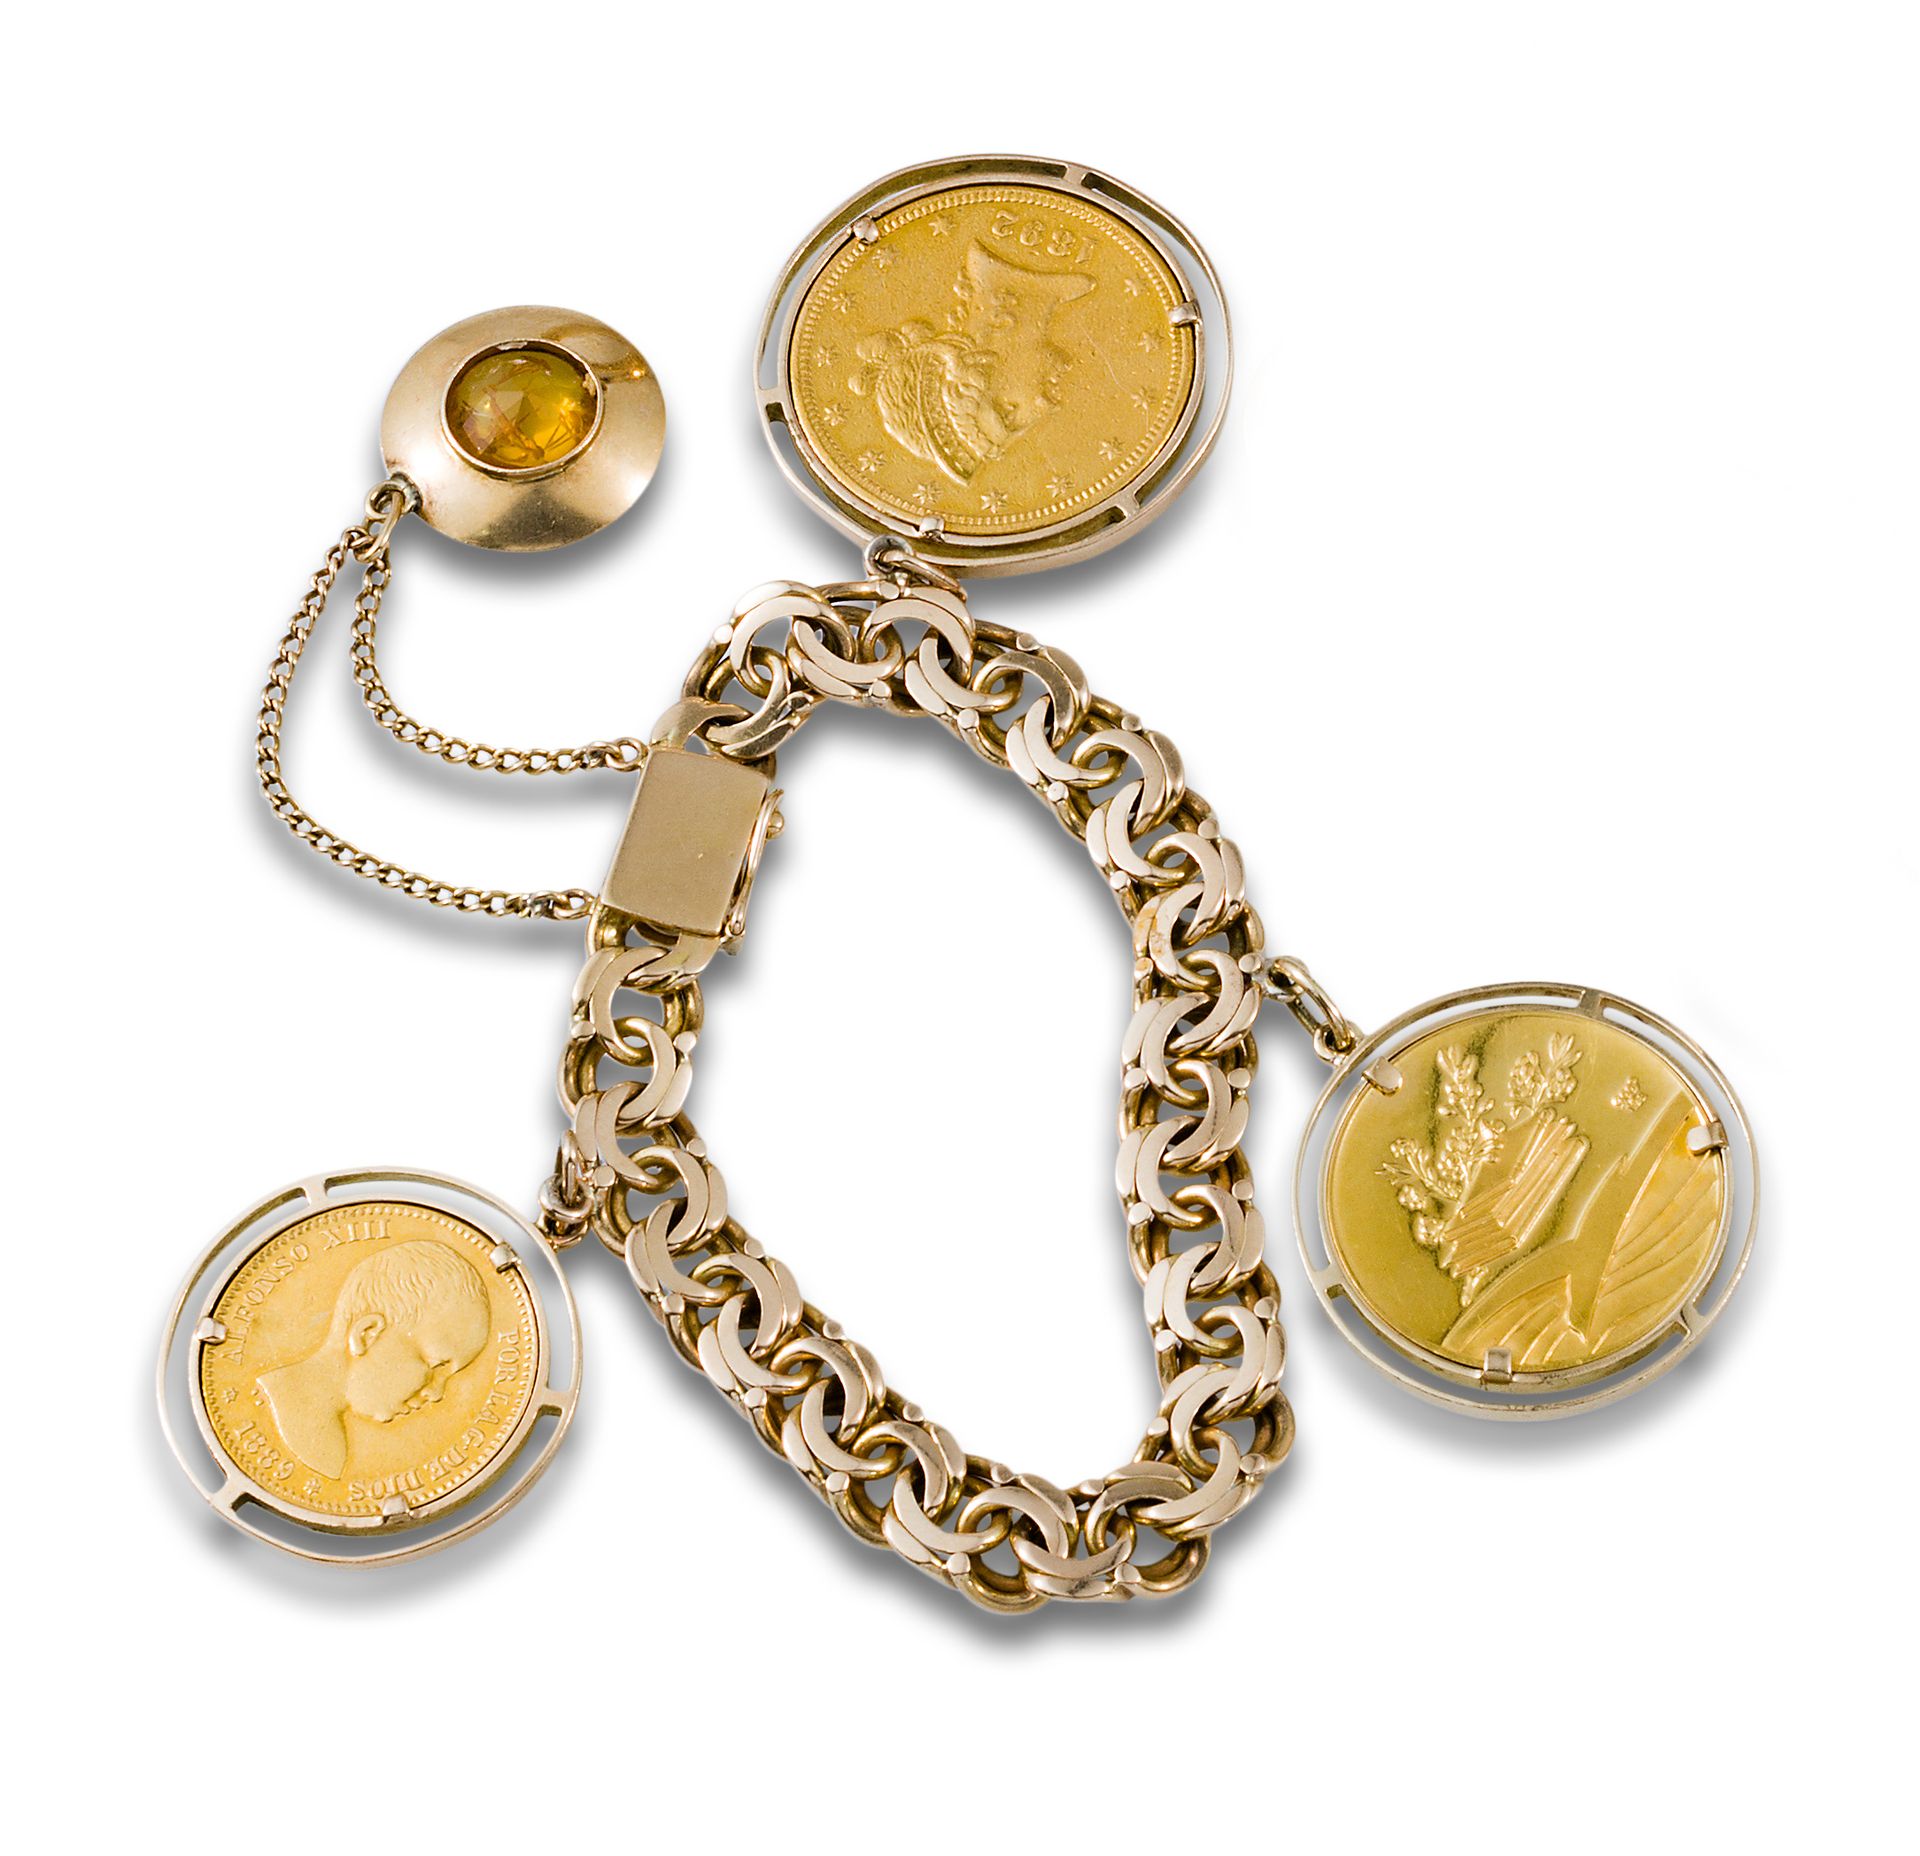 18kt yellow gold braided bracelet with coins and pendant charm. Geflochtenes Arm&hellip;